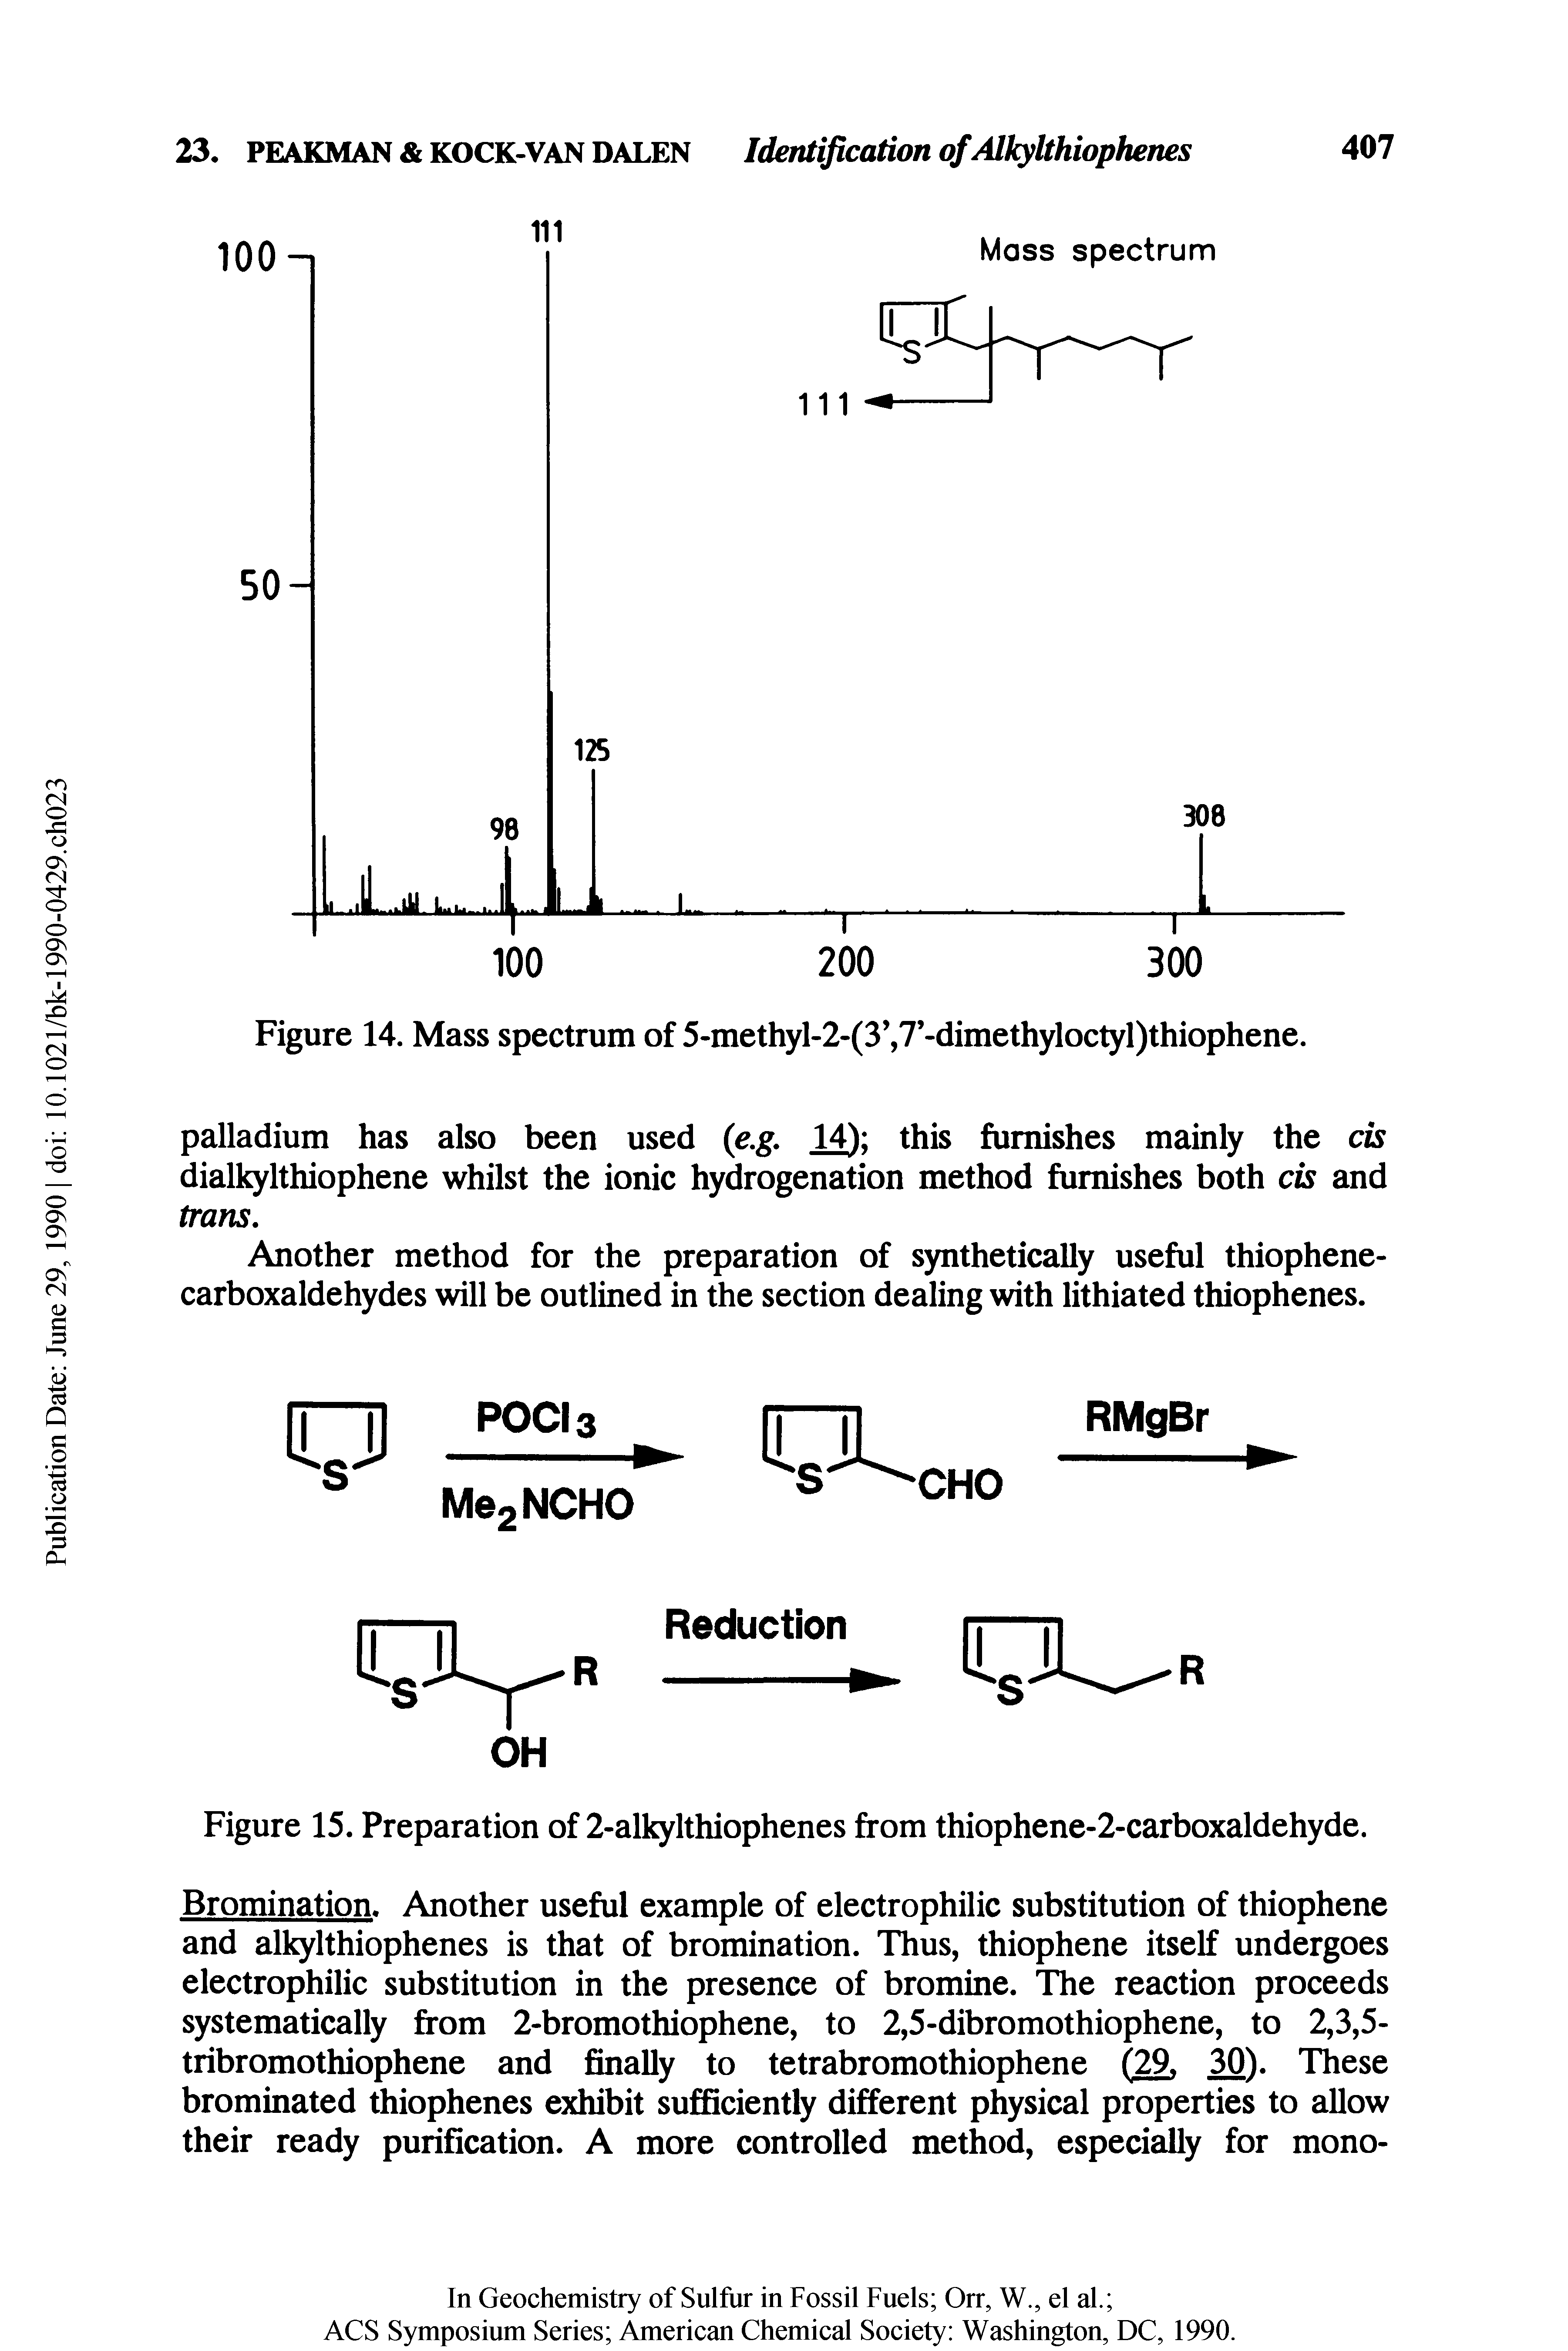 Figure 15. Preparation of 2-alkylthiophenes from thiophene-2-carboxaldehyde.